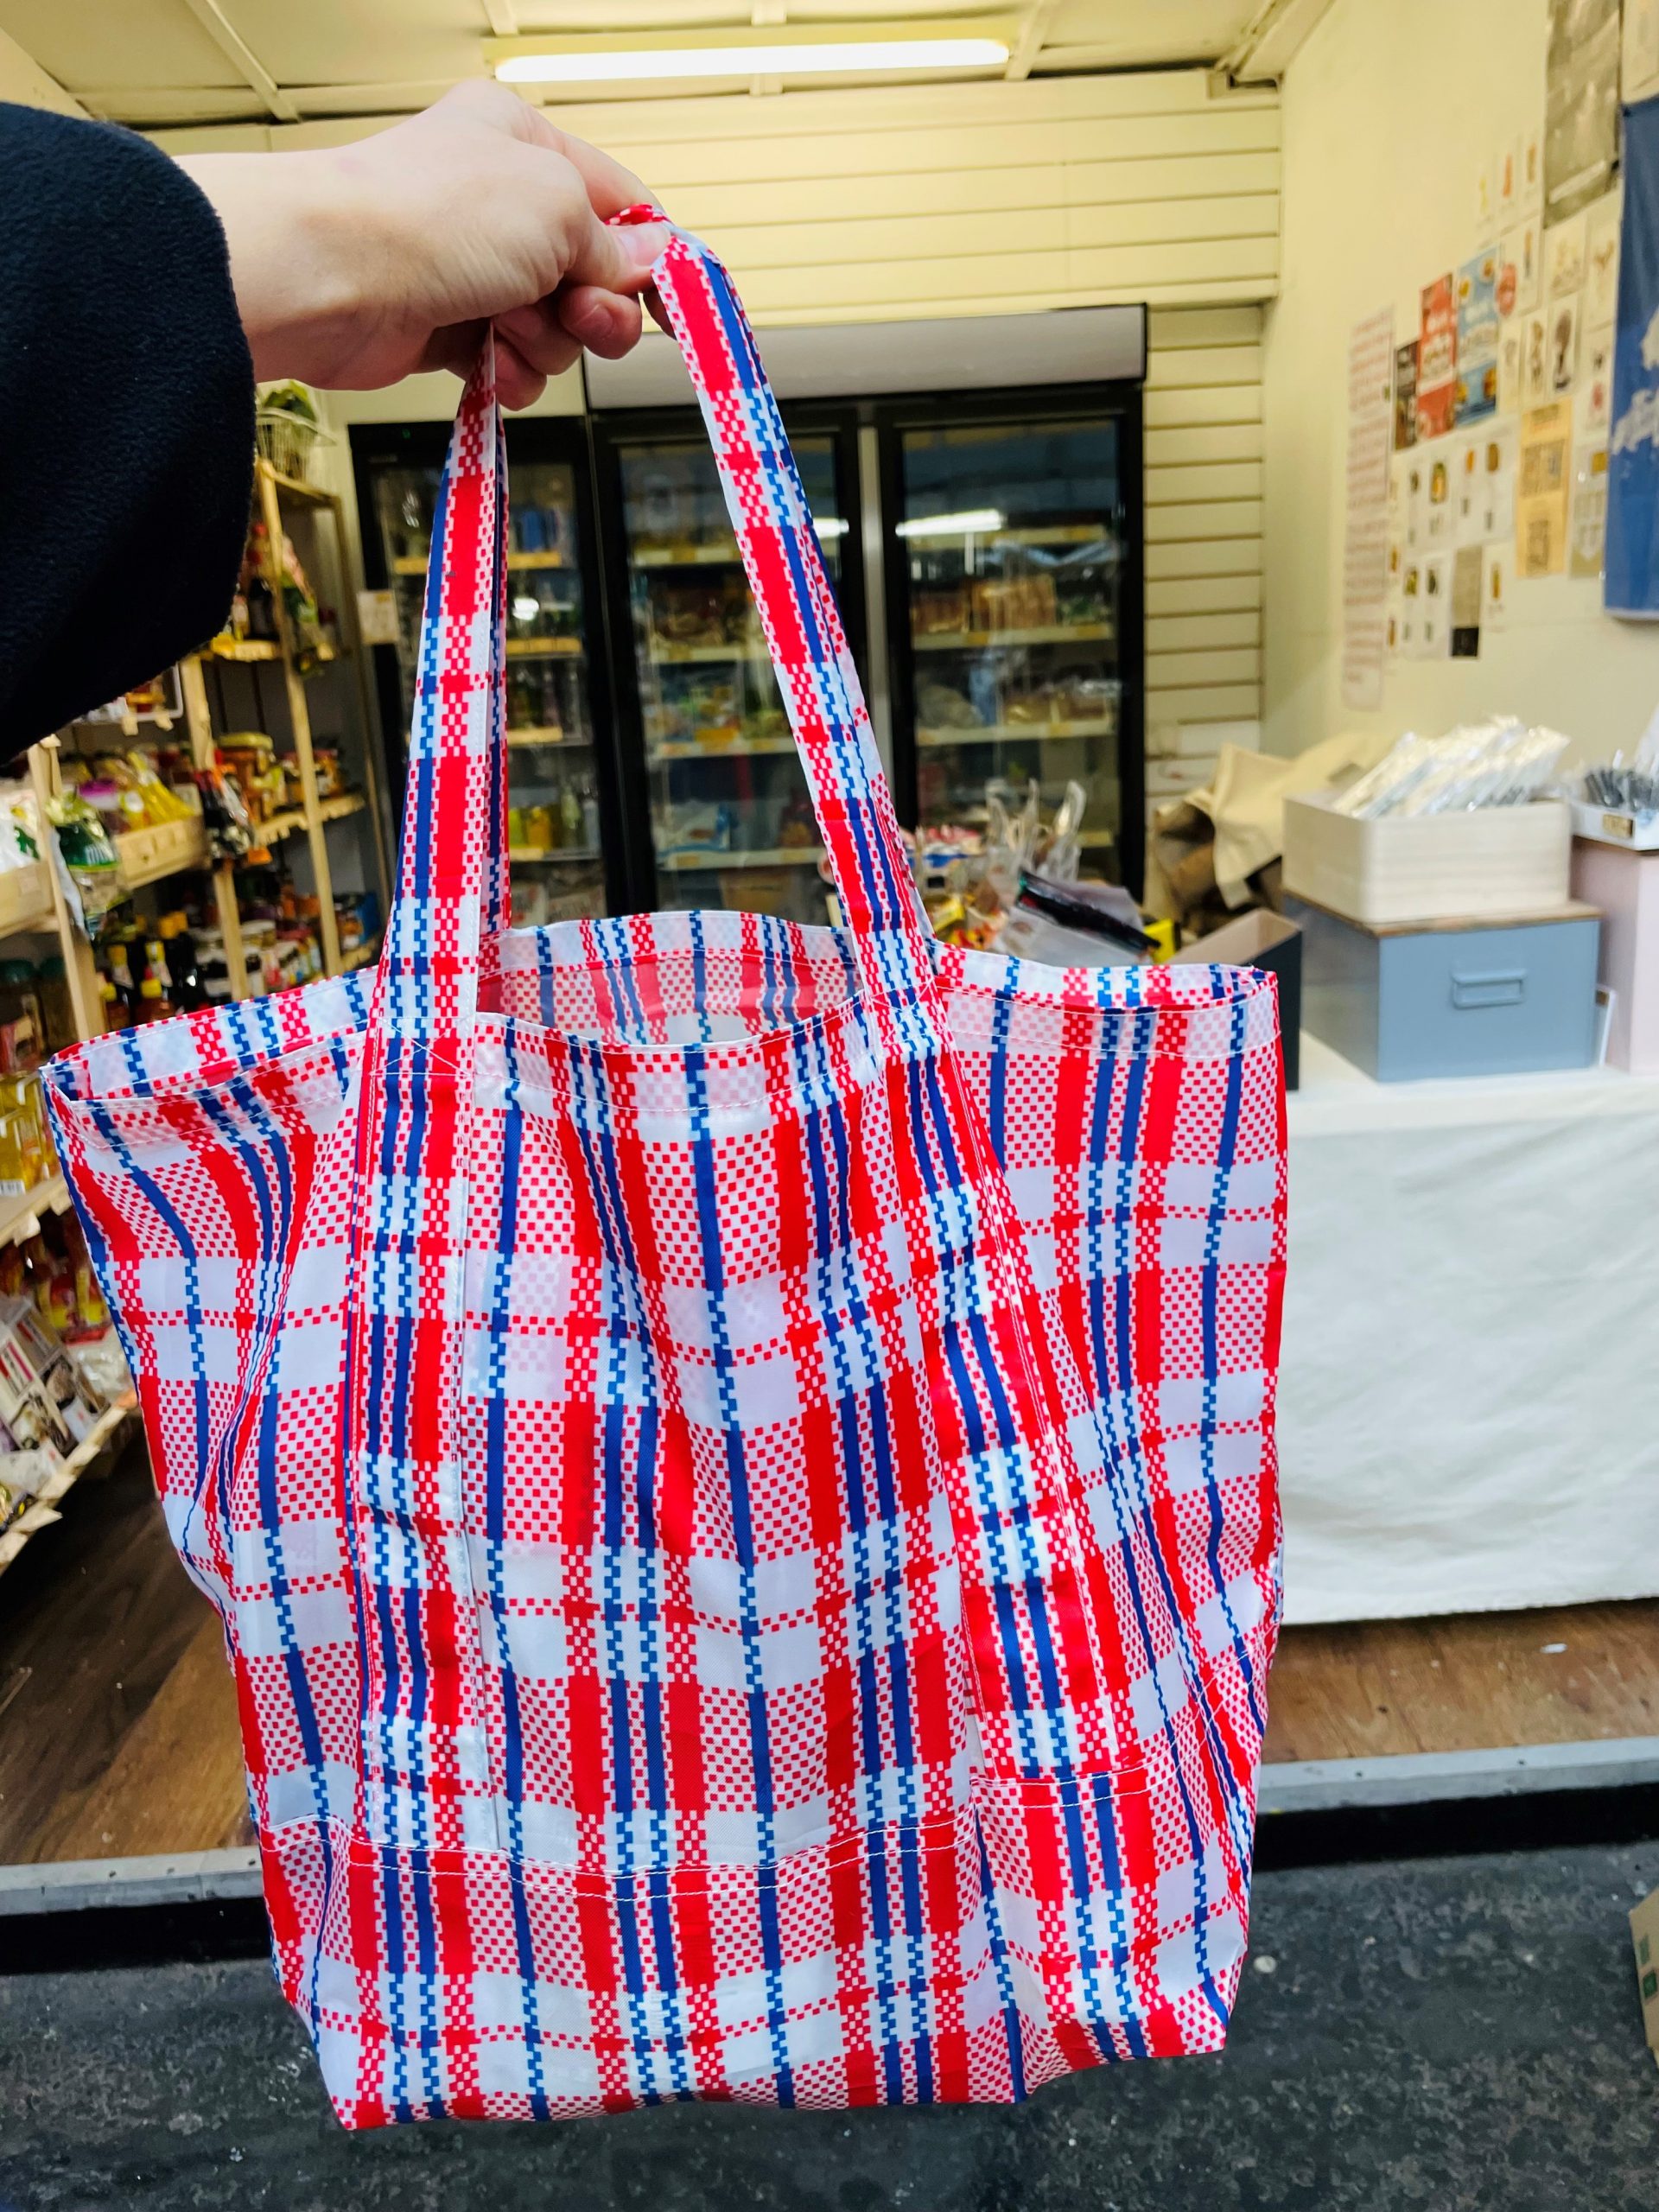 The iconic red, white and blue bag in HK - now reinvented!